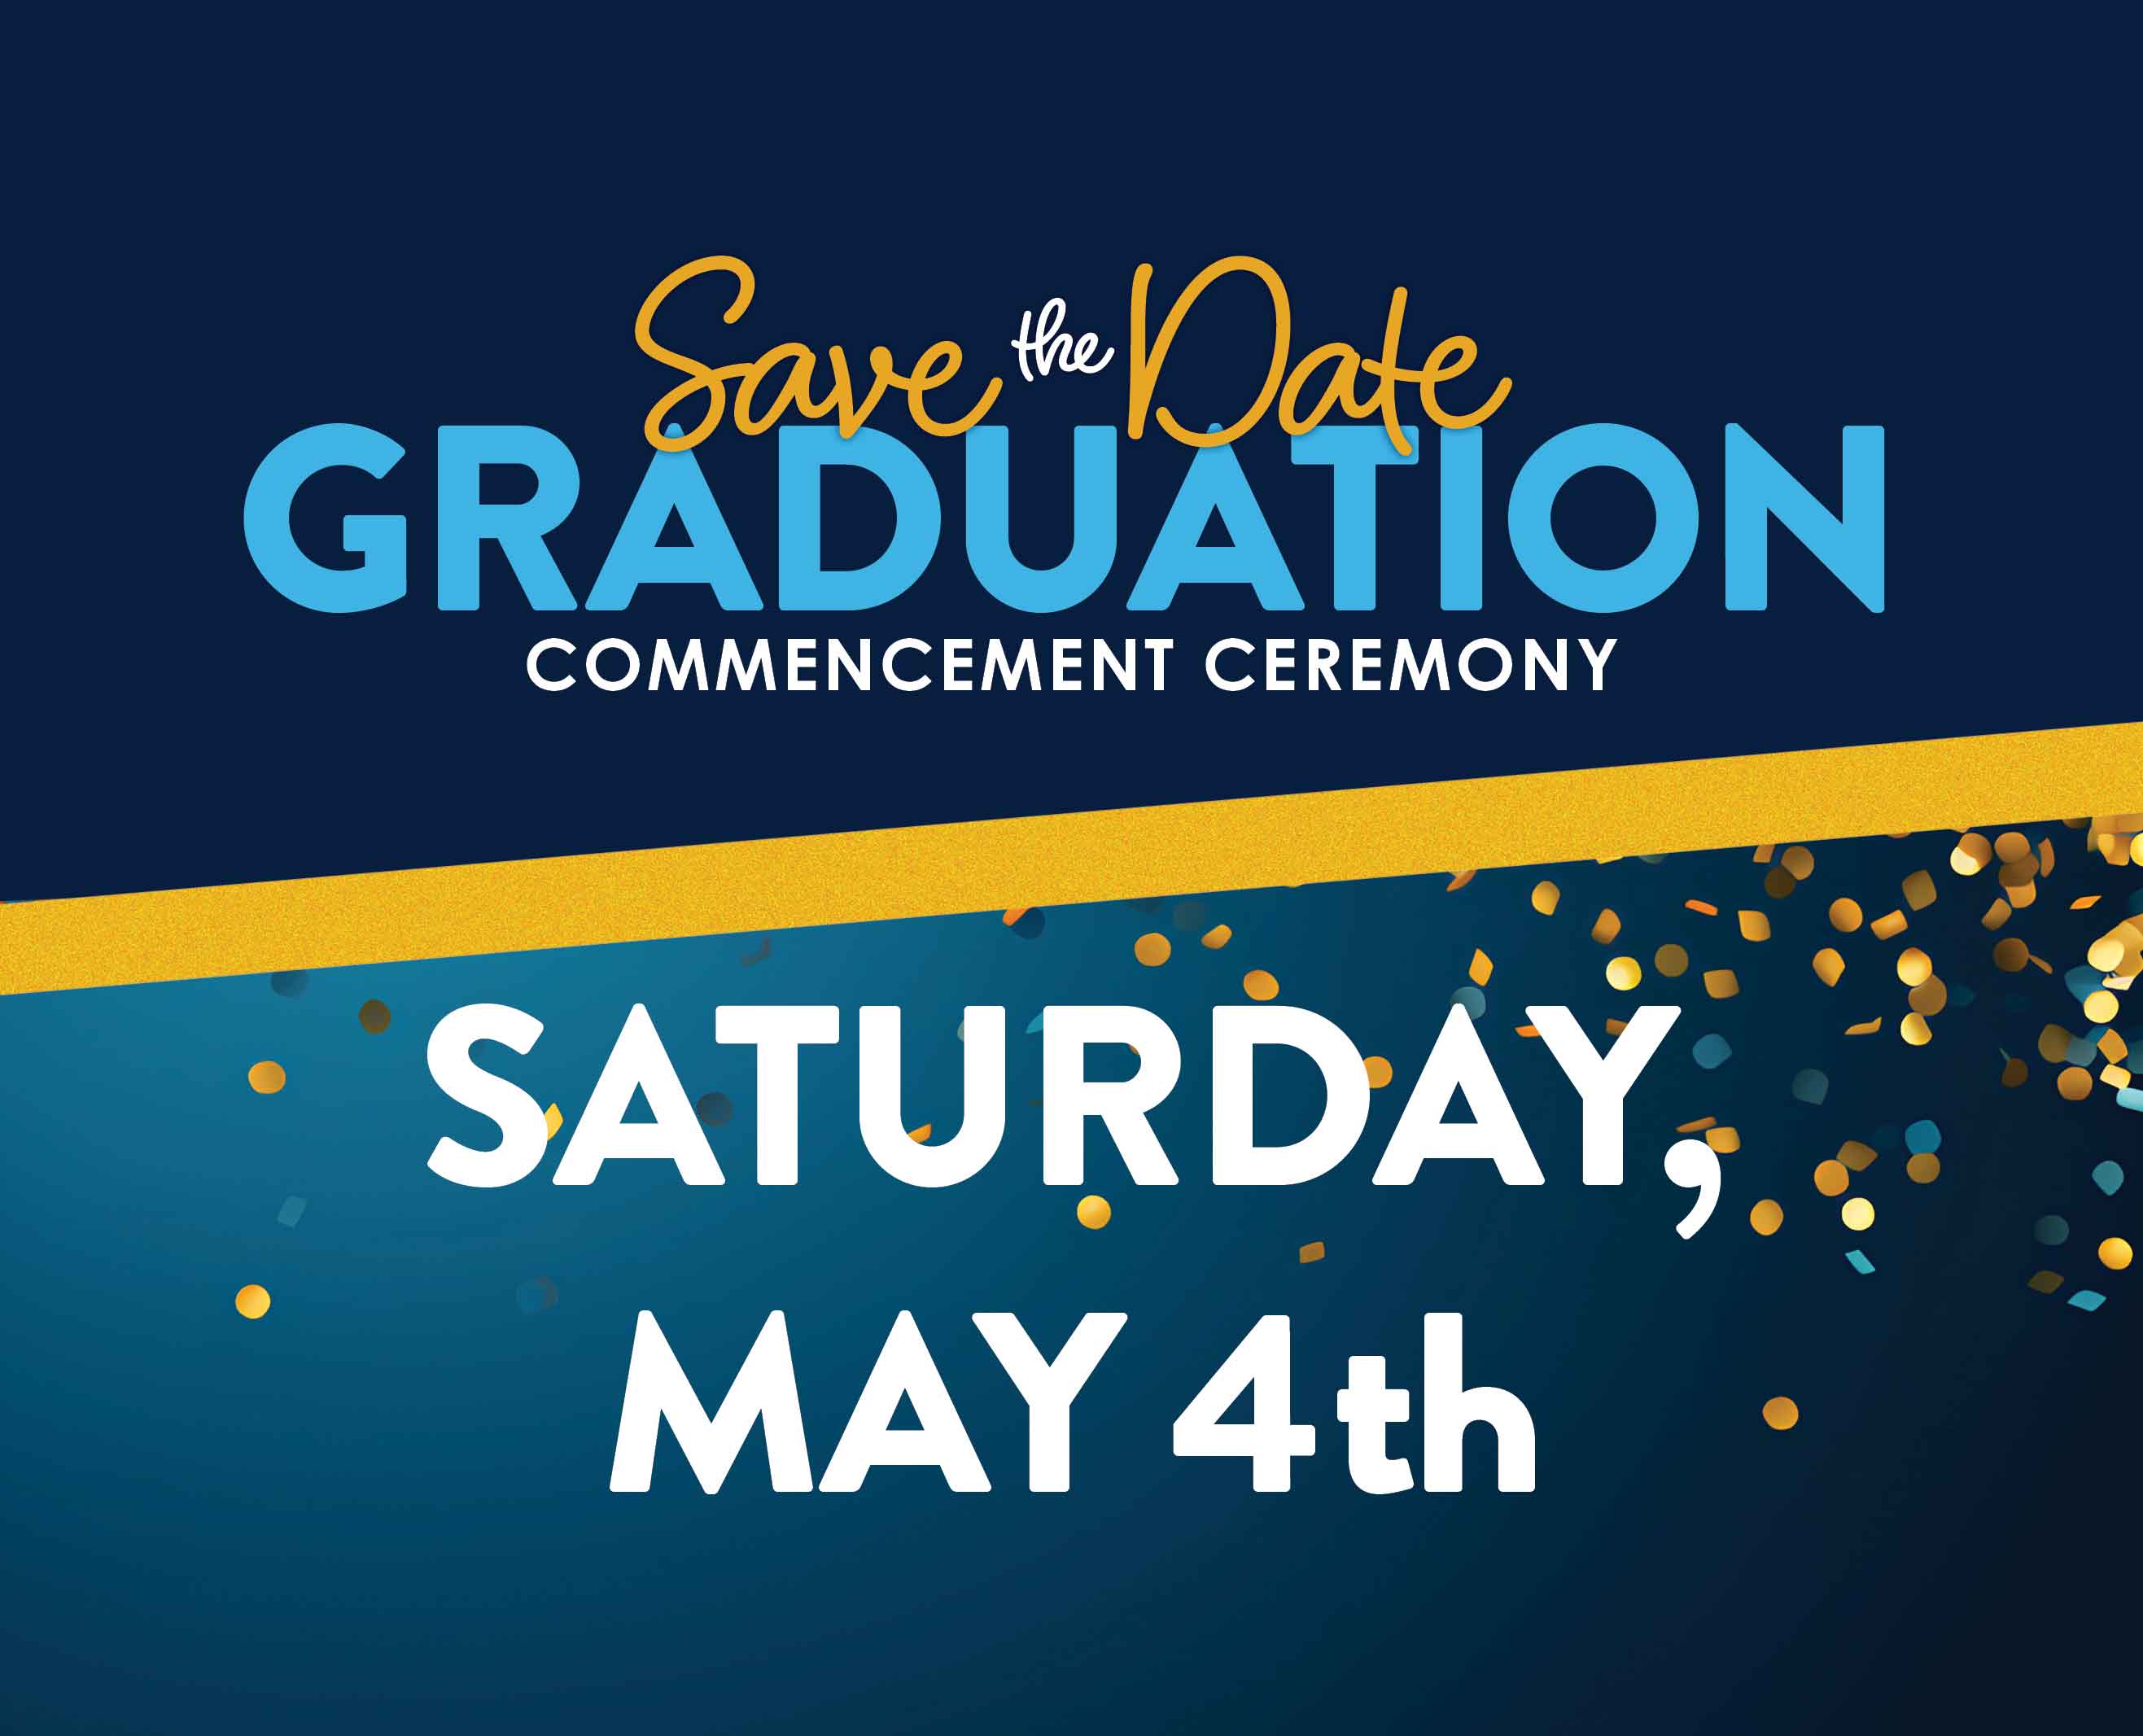 Graduation Save the Date Commencement Ceremony Saturday, May 4th